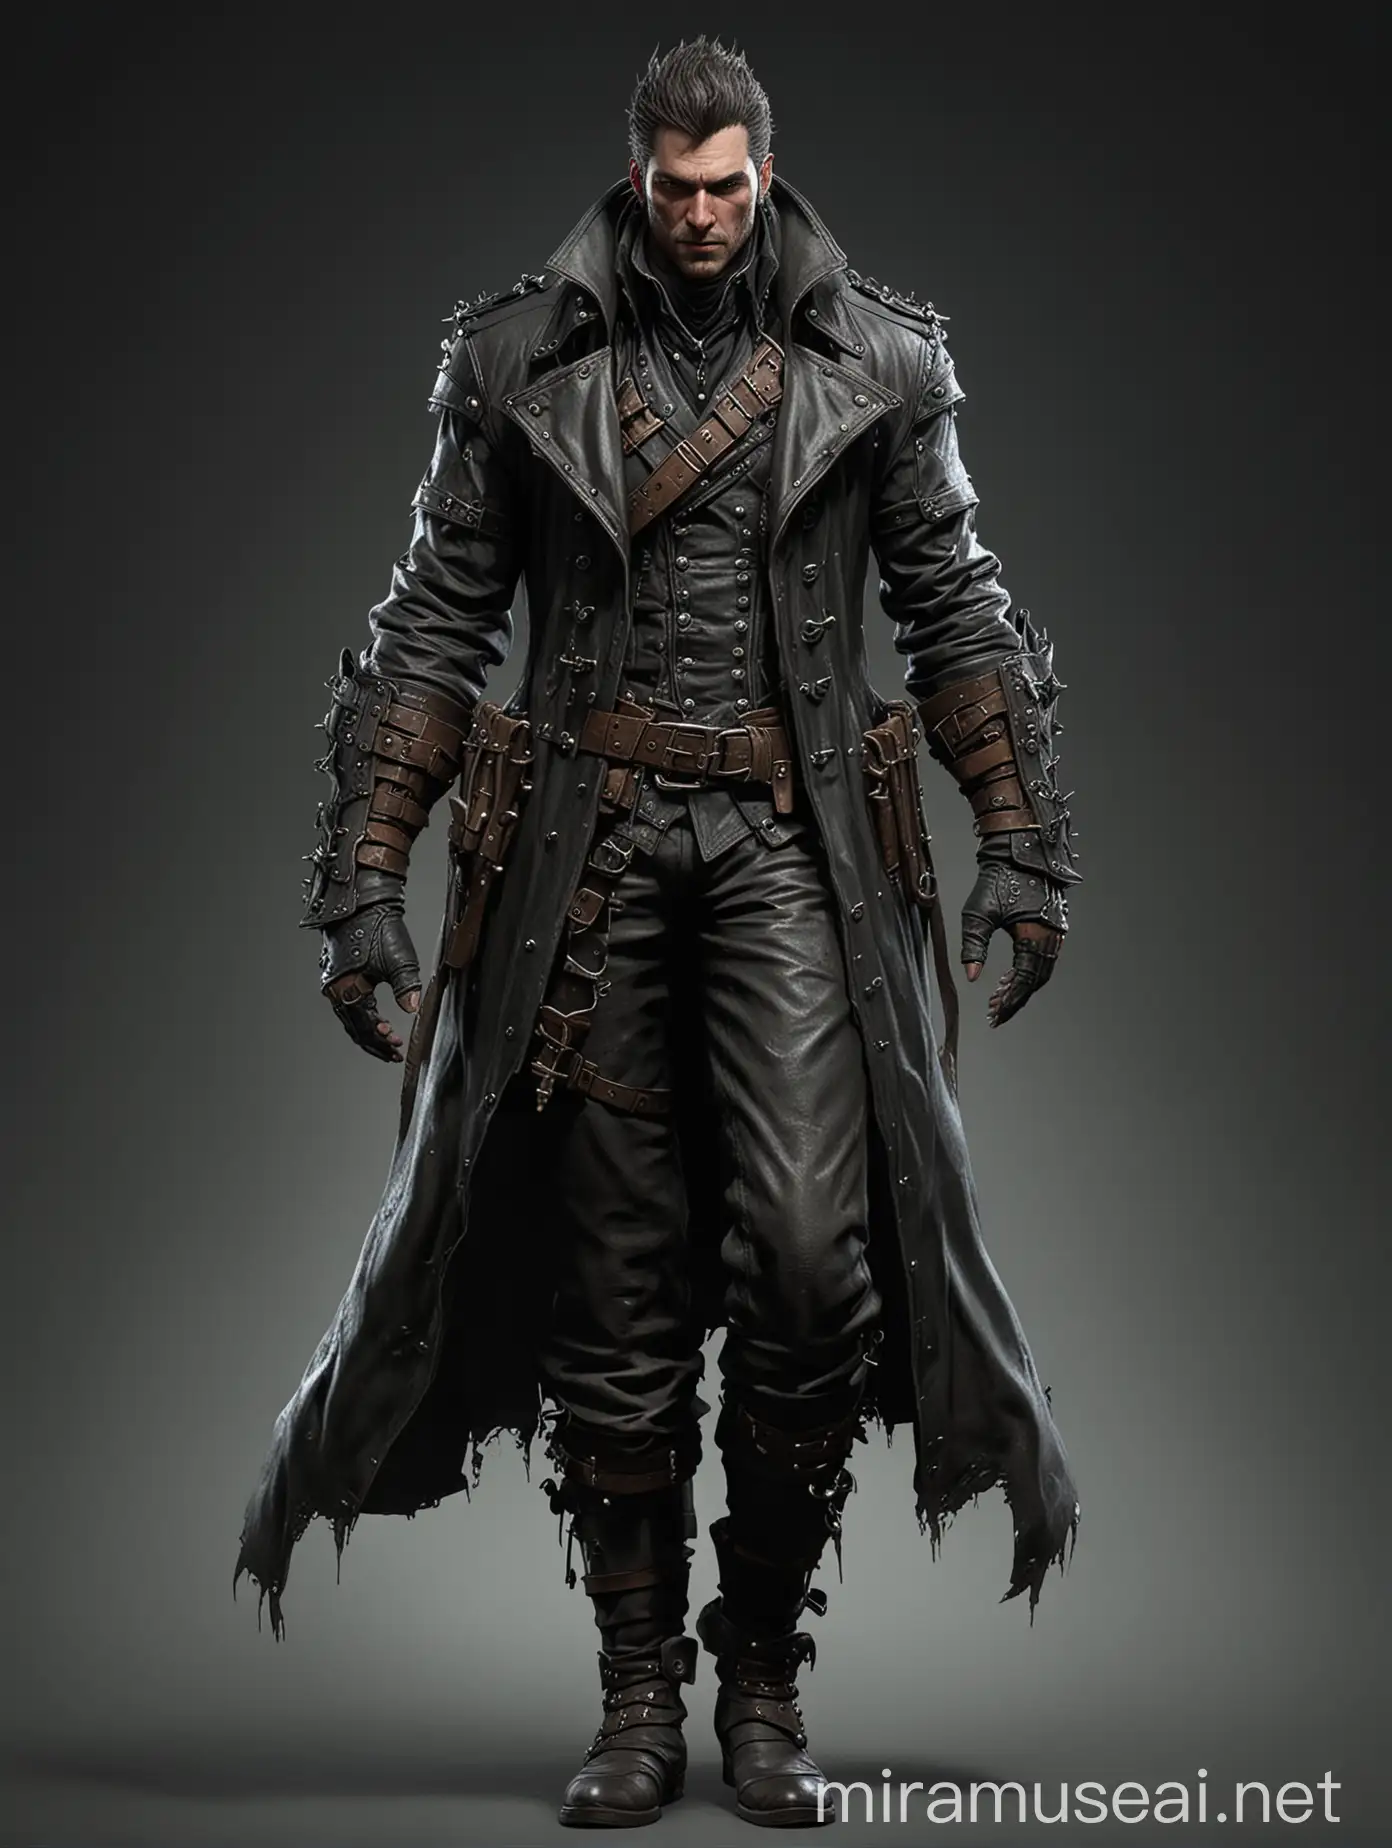 Dark Fantasy Character Design Bloodborne Inspired Strong Male in Heavy Leather Coat